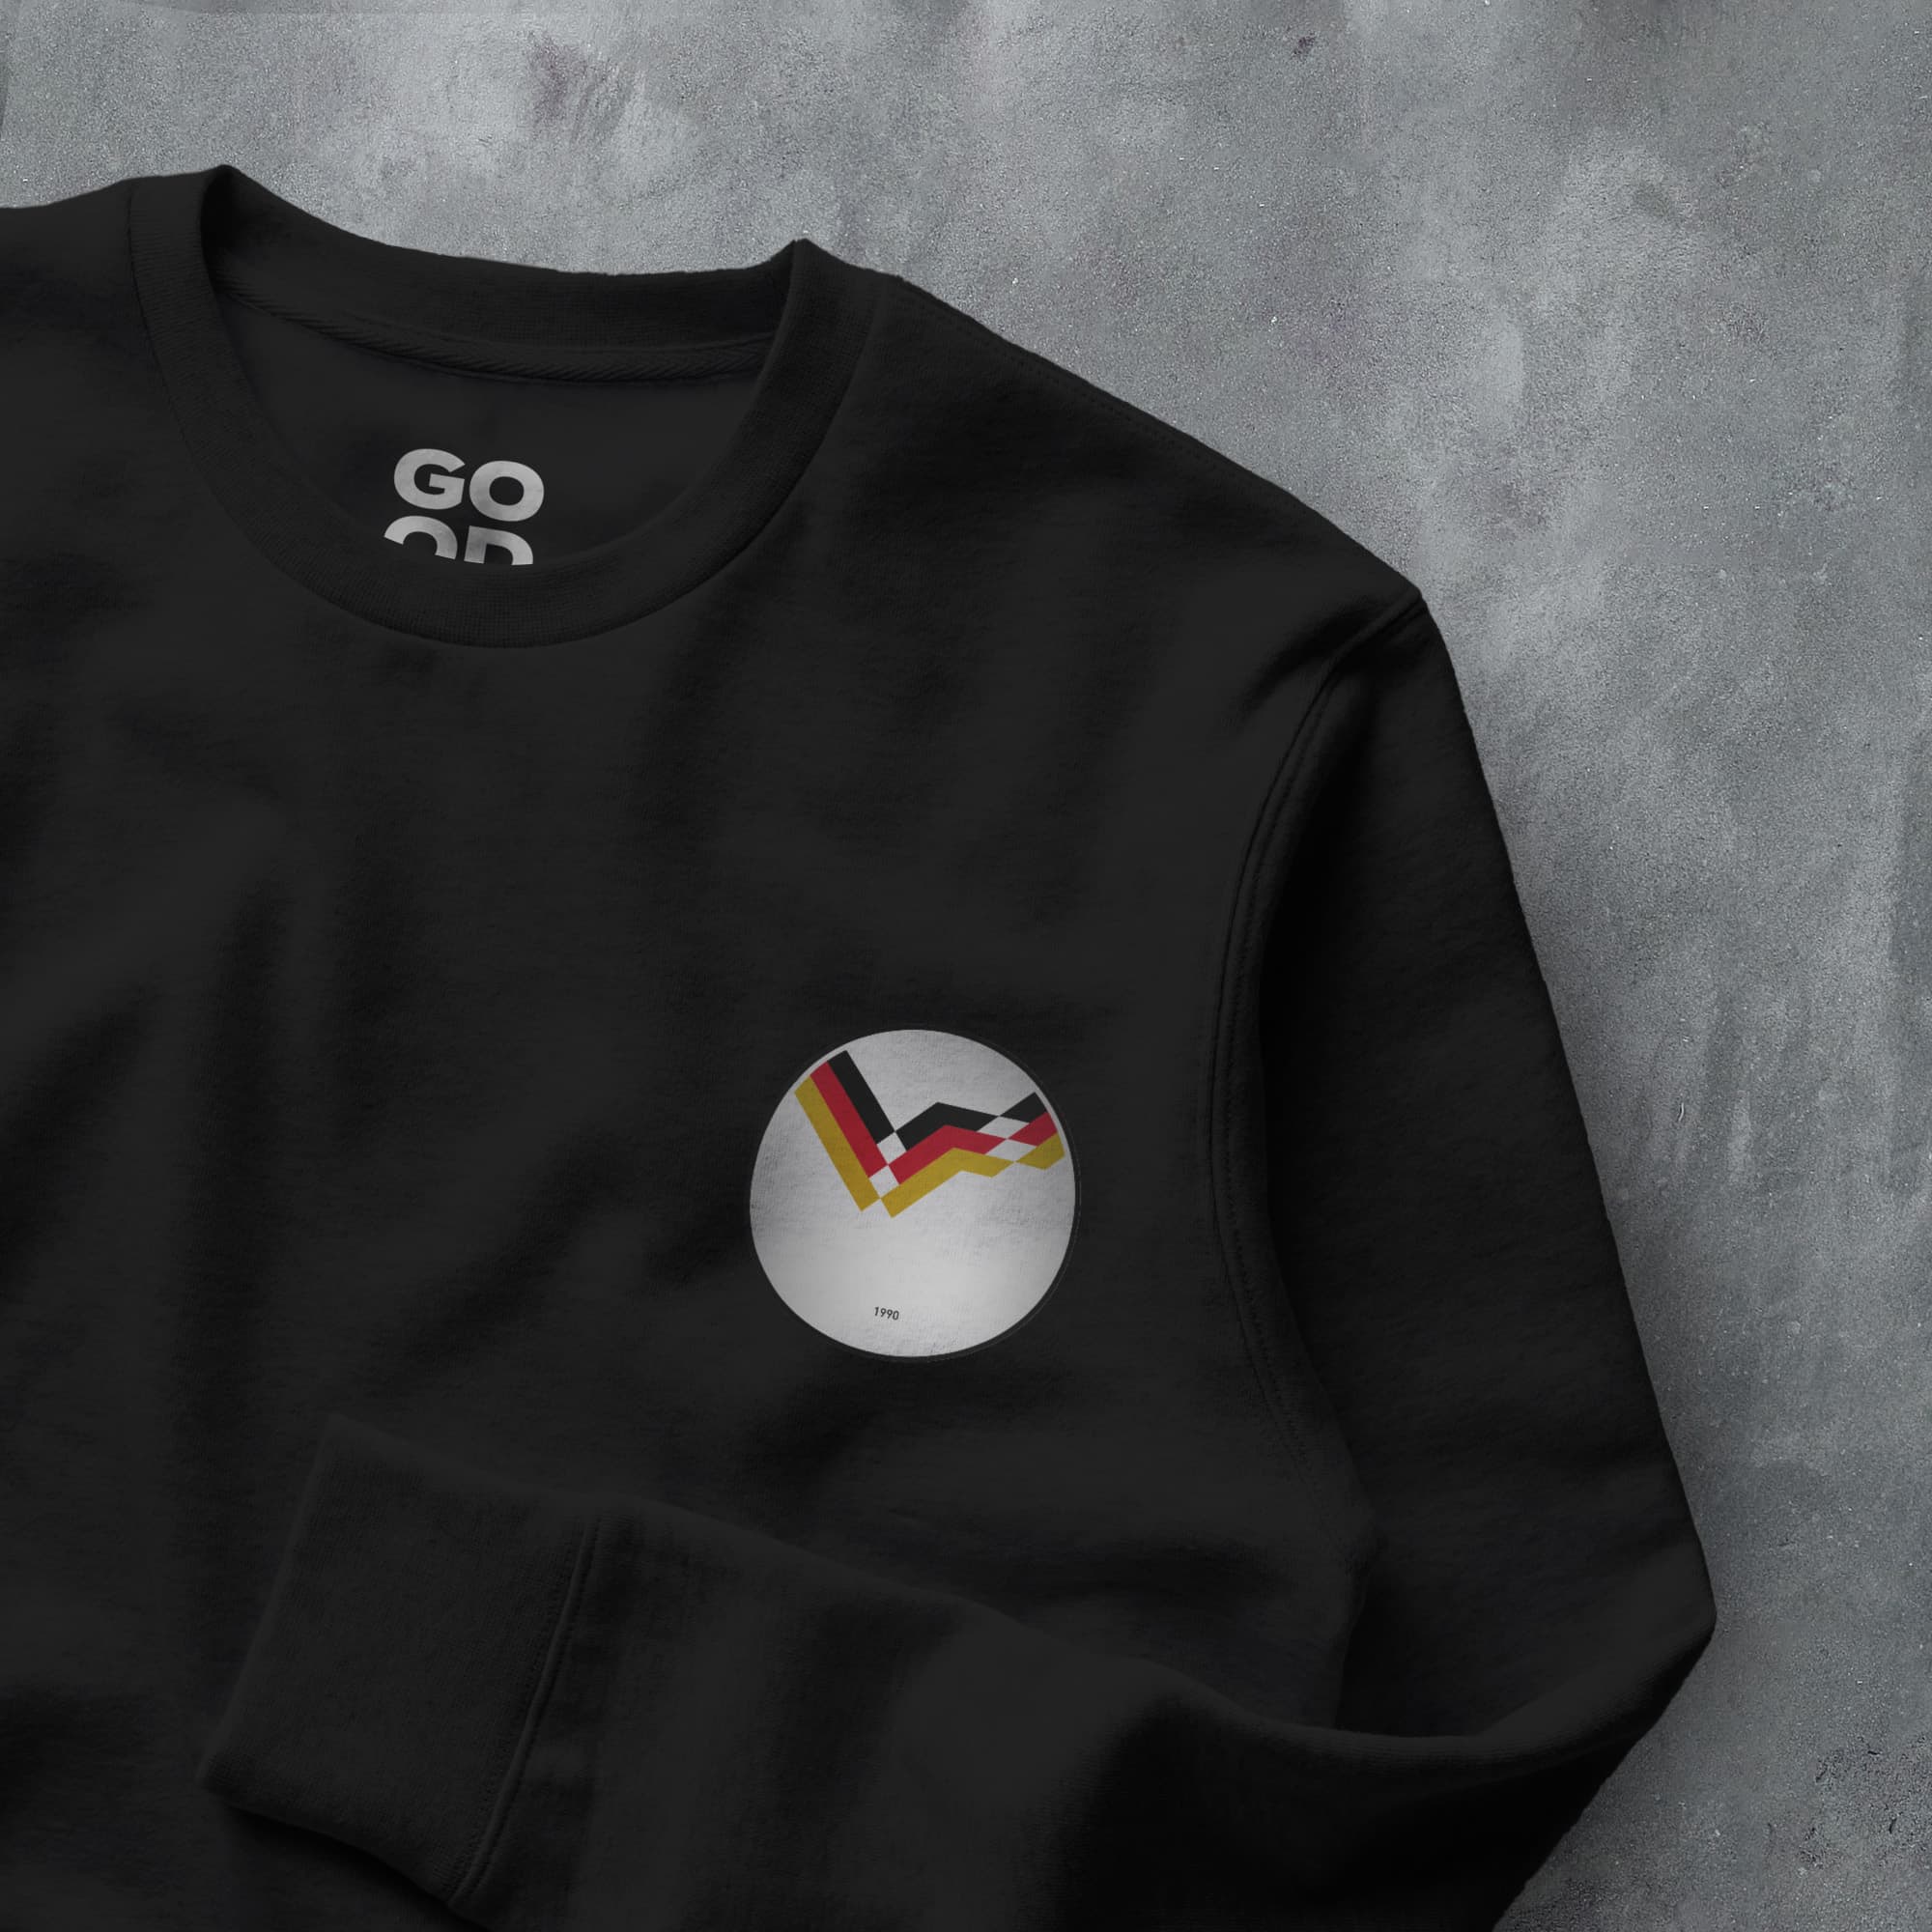 a black sweatshirt with a colorful logo on it